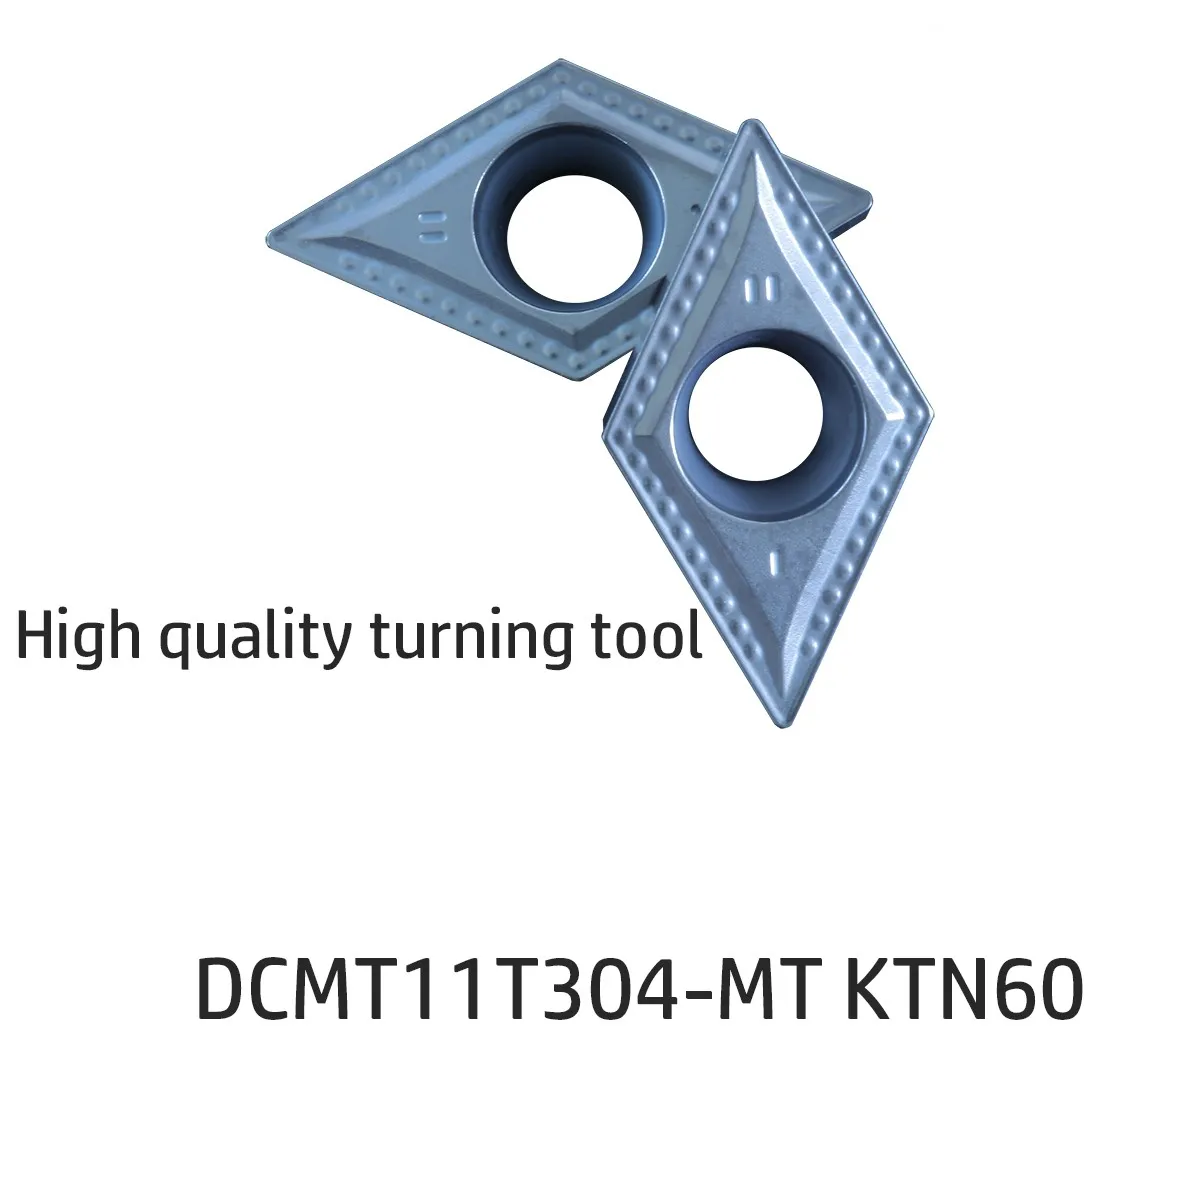 Turning Tools DCMT CNC Lathe Turning Tools DCMT11T304-MT Metal Ceramic High quality inserts Turning Tools